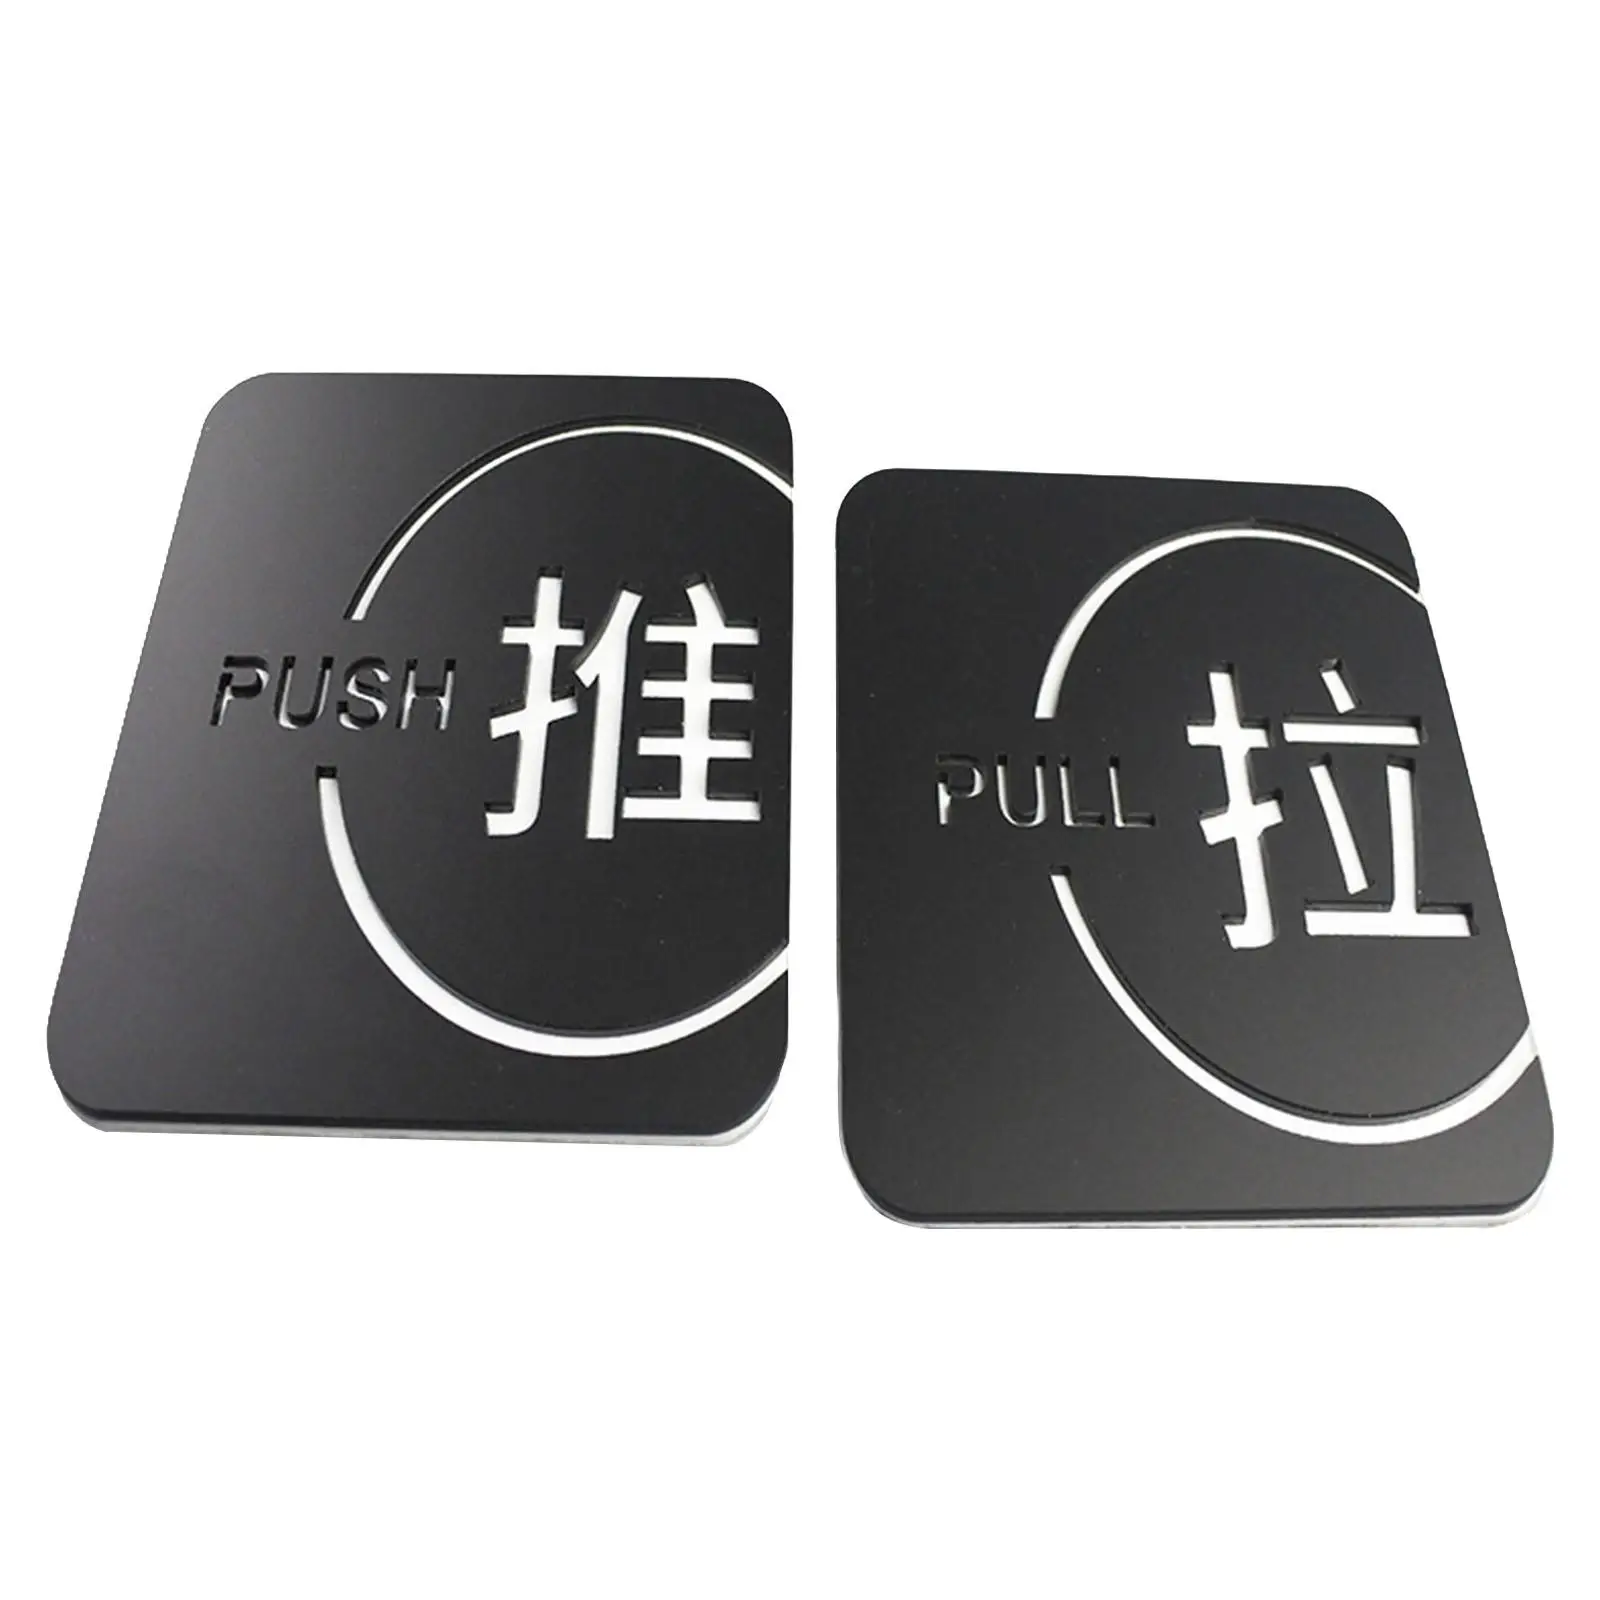 Push Pull Door Sign Stickers Back Adhesive Waterproof Fade Resistant Signage for Stores Cafes